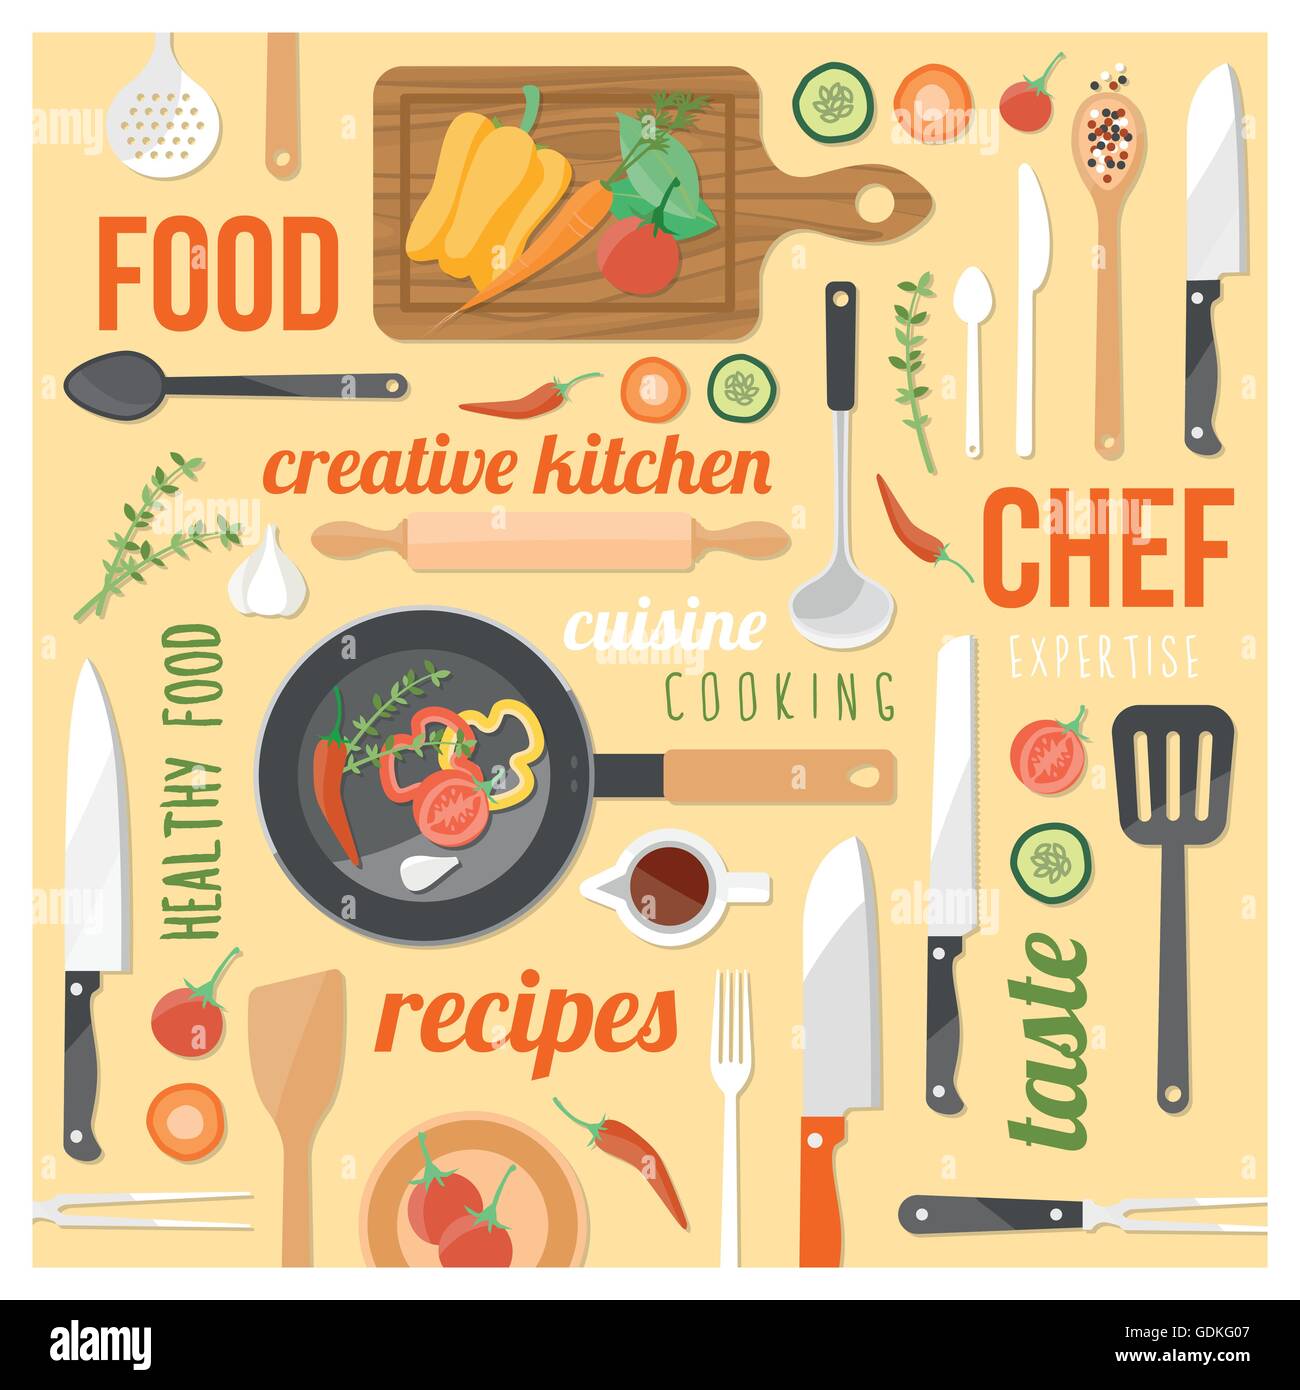 Creative cooking background with kitchen tools, food ingredients and words on a yellow background in a square frame Stock Vector